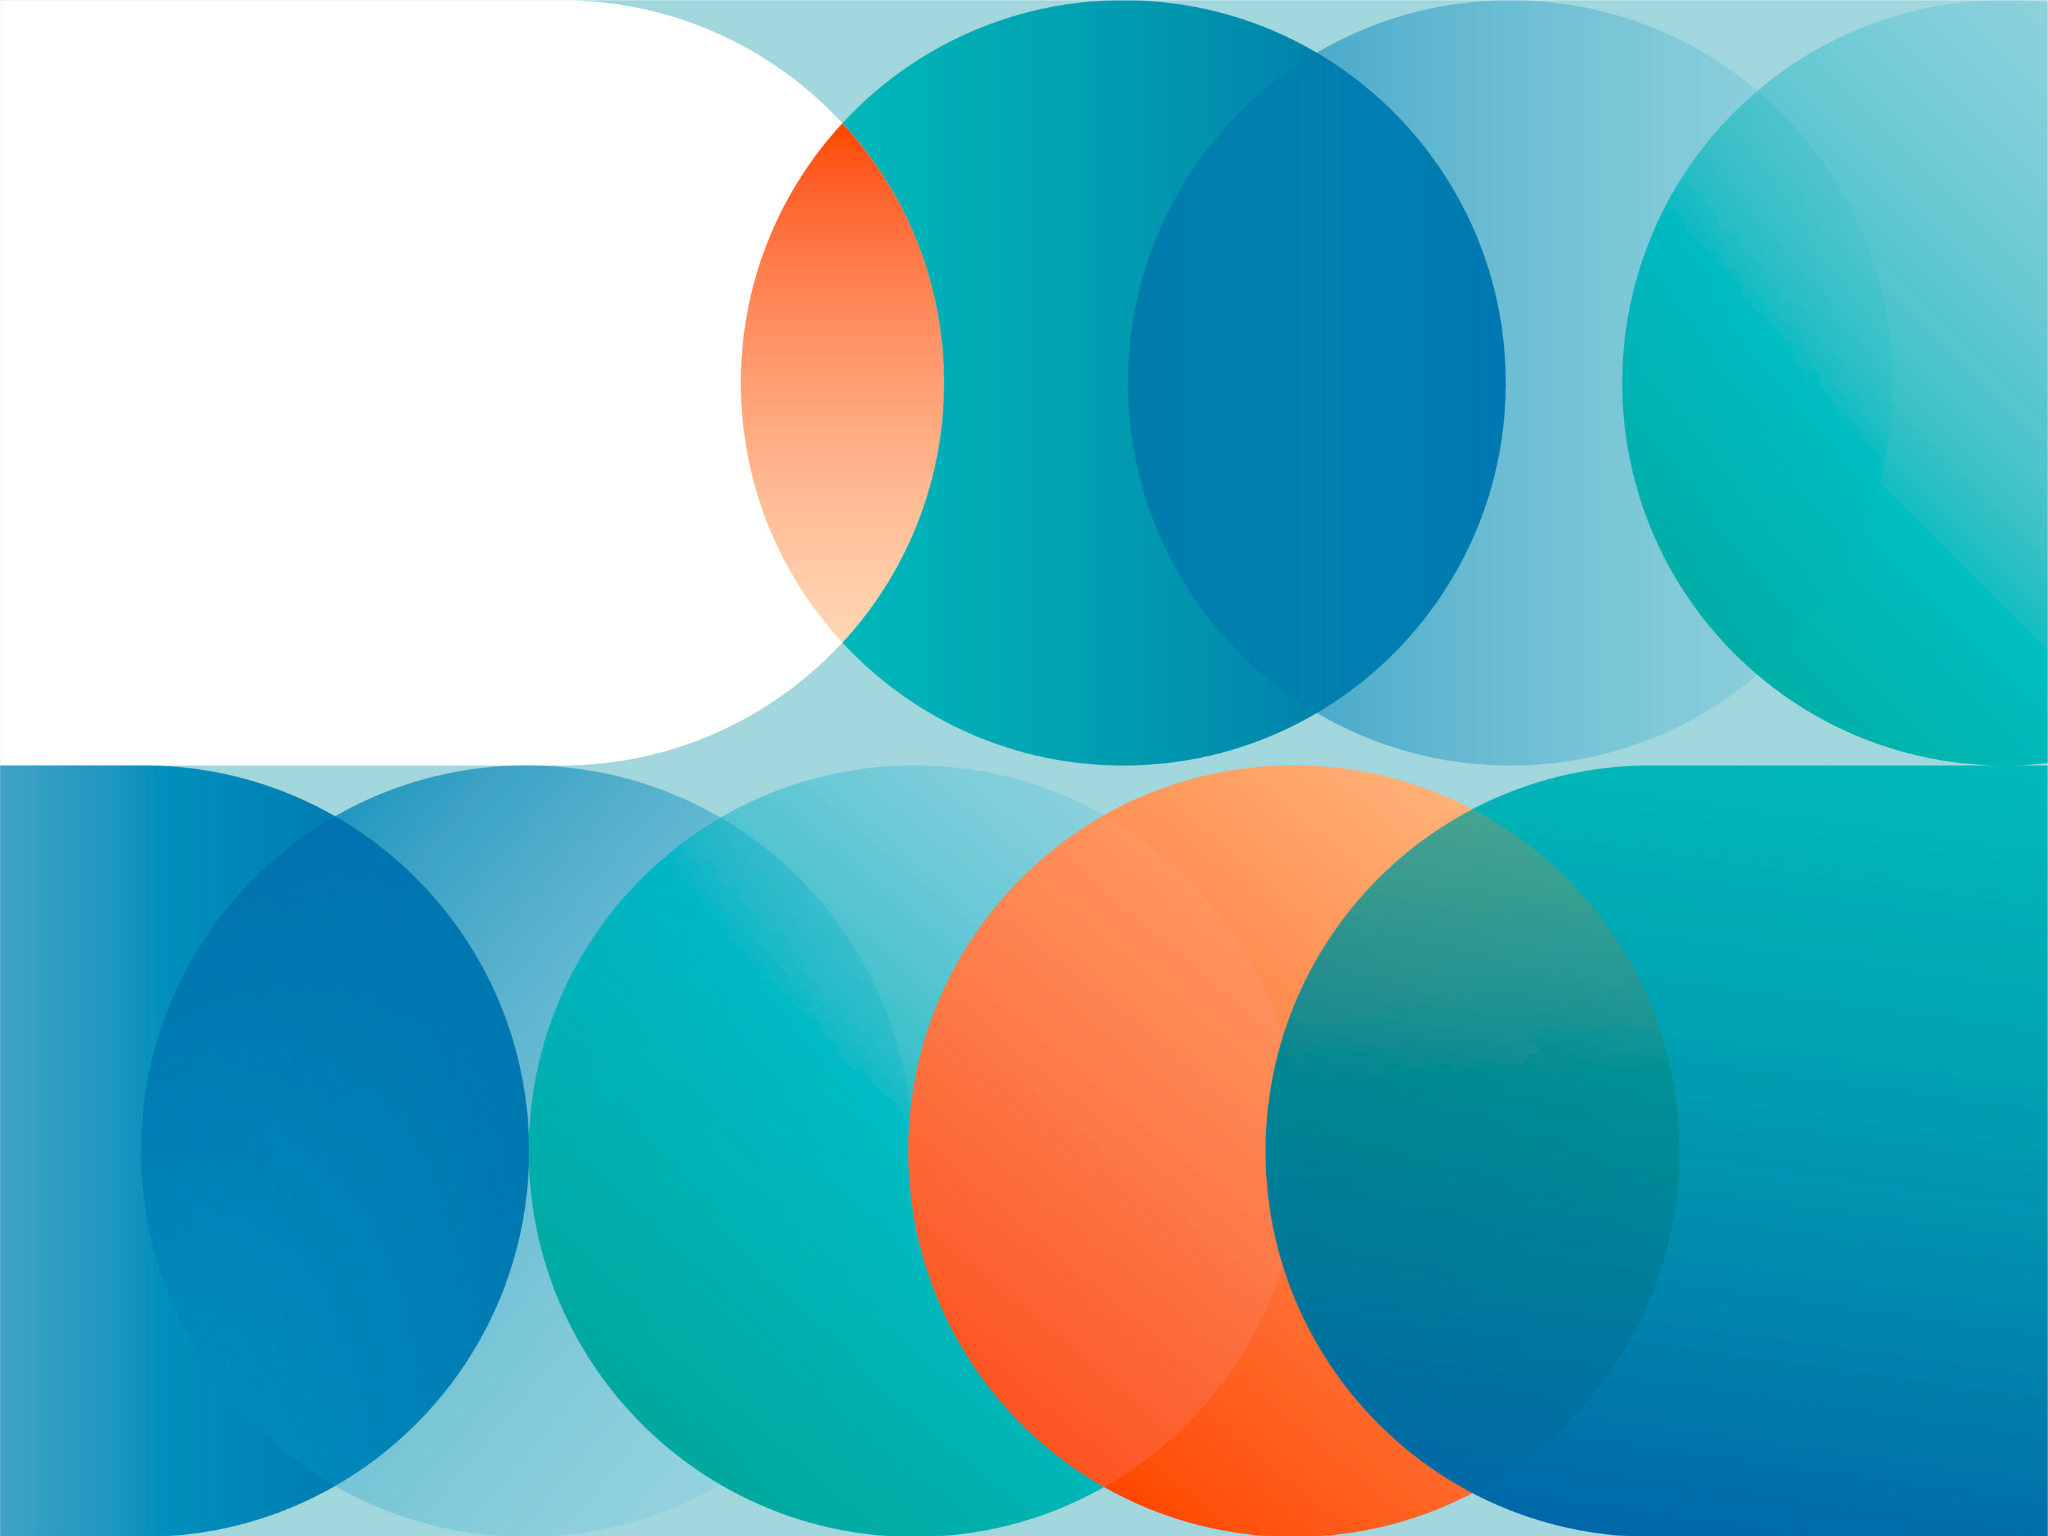 Overlapping circle images with gradients between the CMF Brand colors of blue, light blue, aqua blue and pops of orange partial circles 